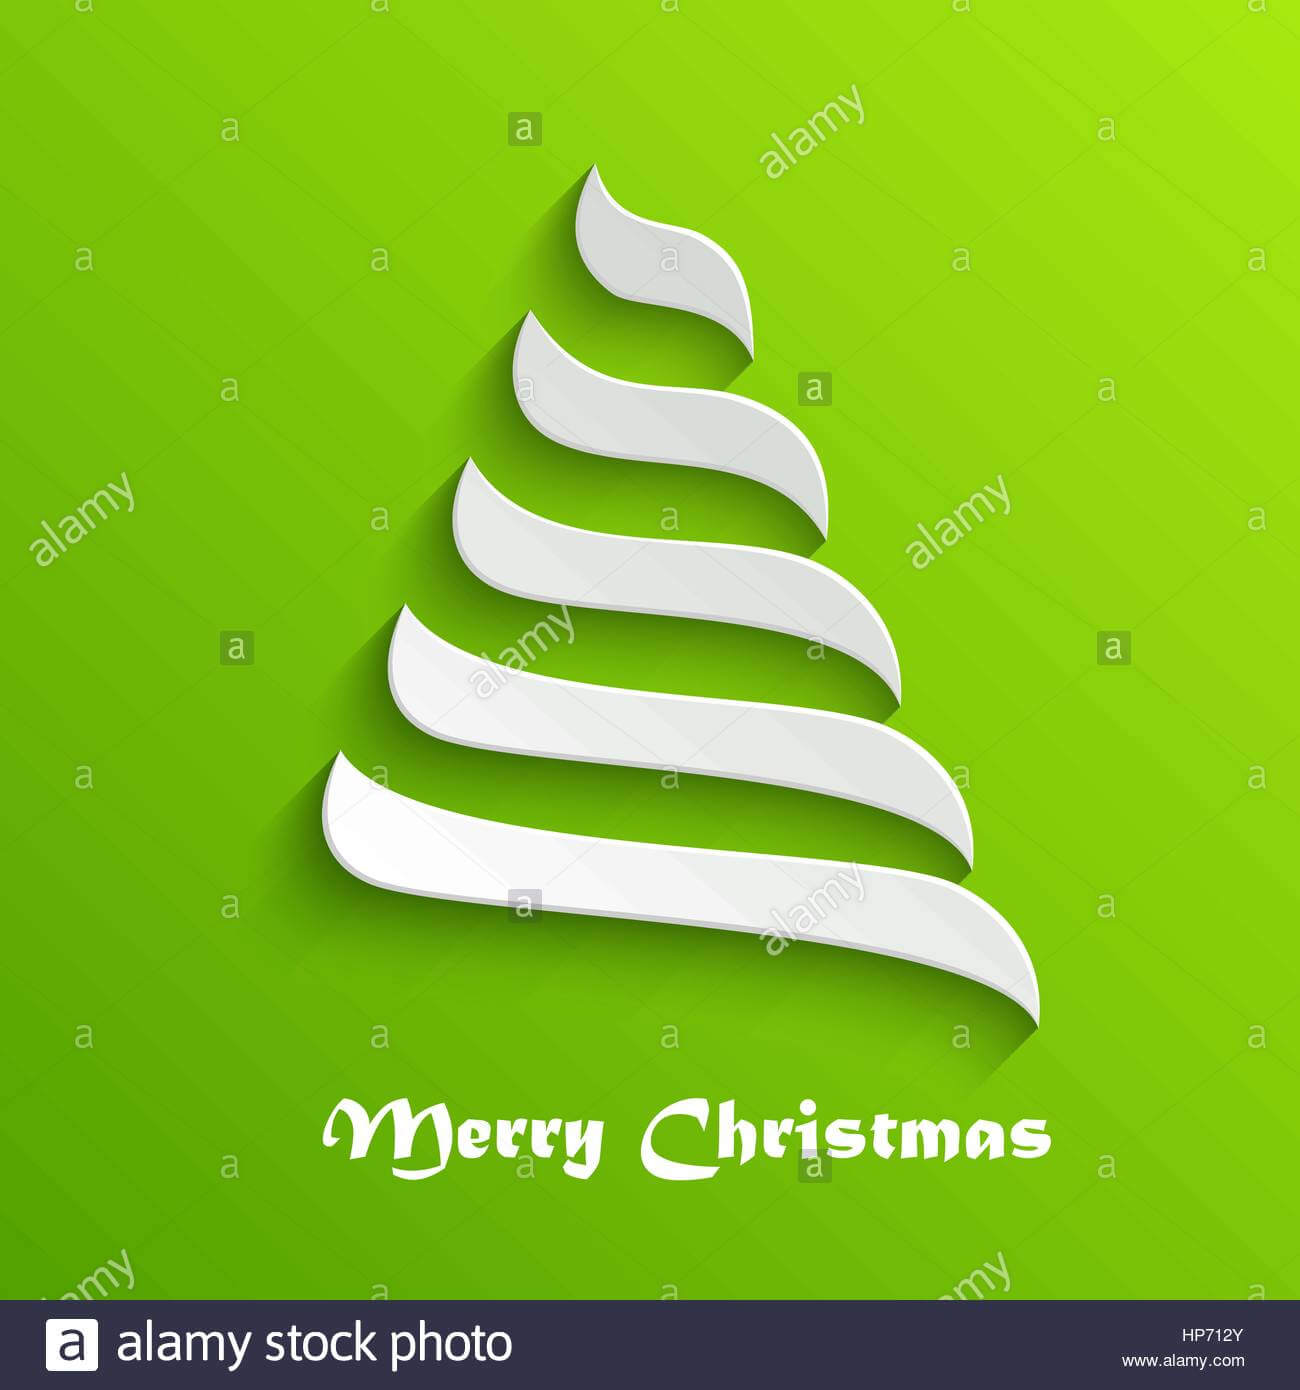 Abstract Modern 3D White Christmas Tree On Green Background With 3D Christmas Tree Card Template